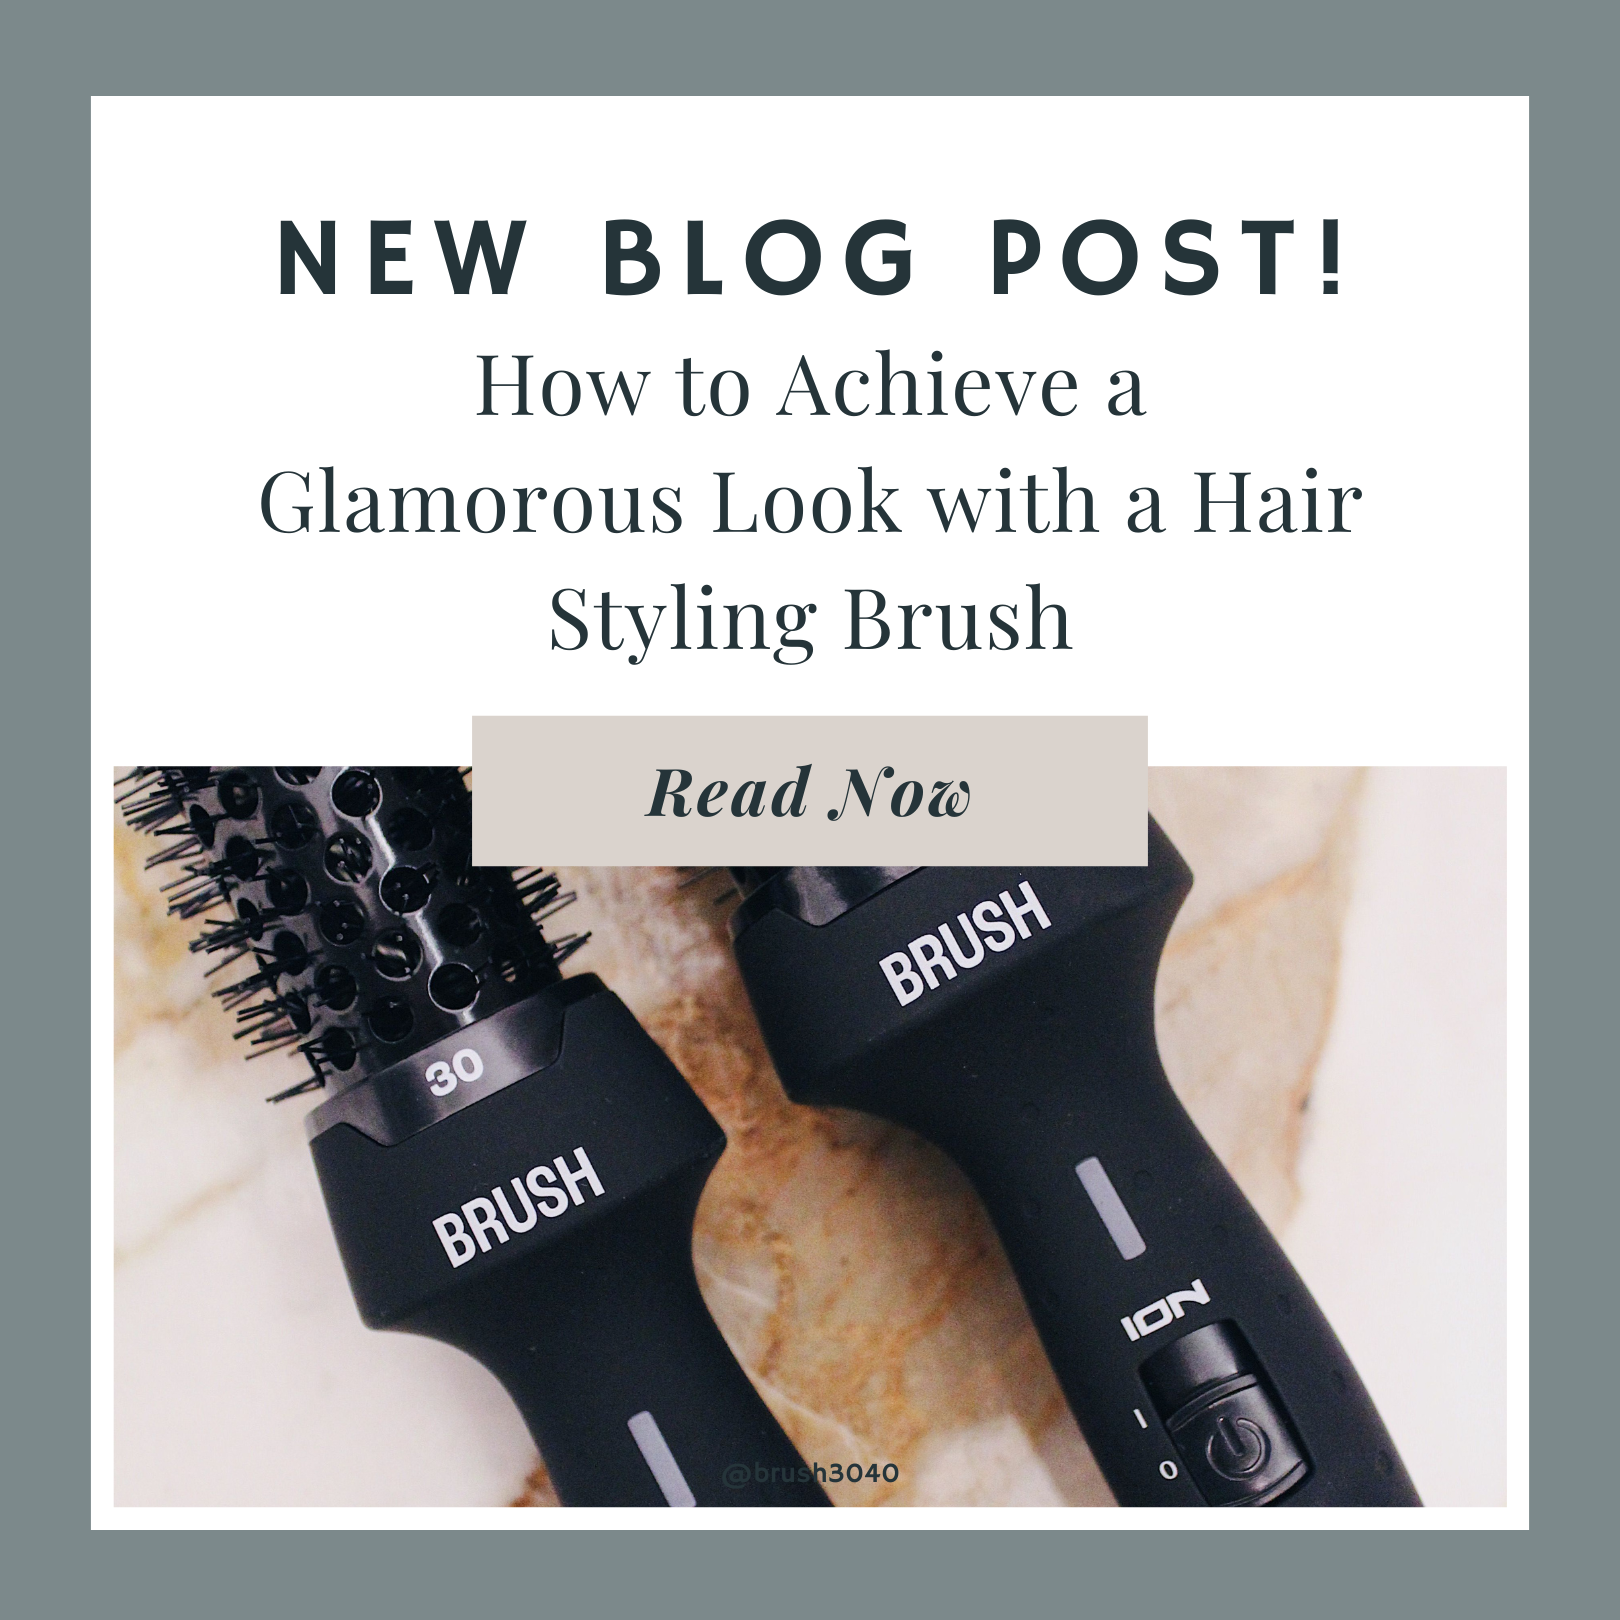 How to Achieve a Glamorous Look with a Hair Styling Brush